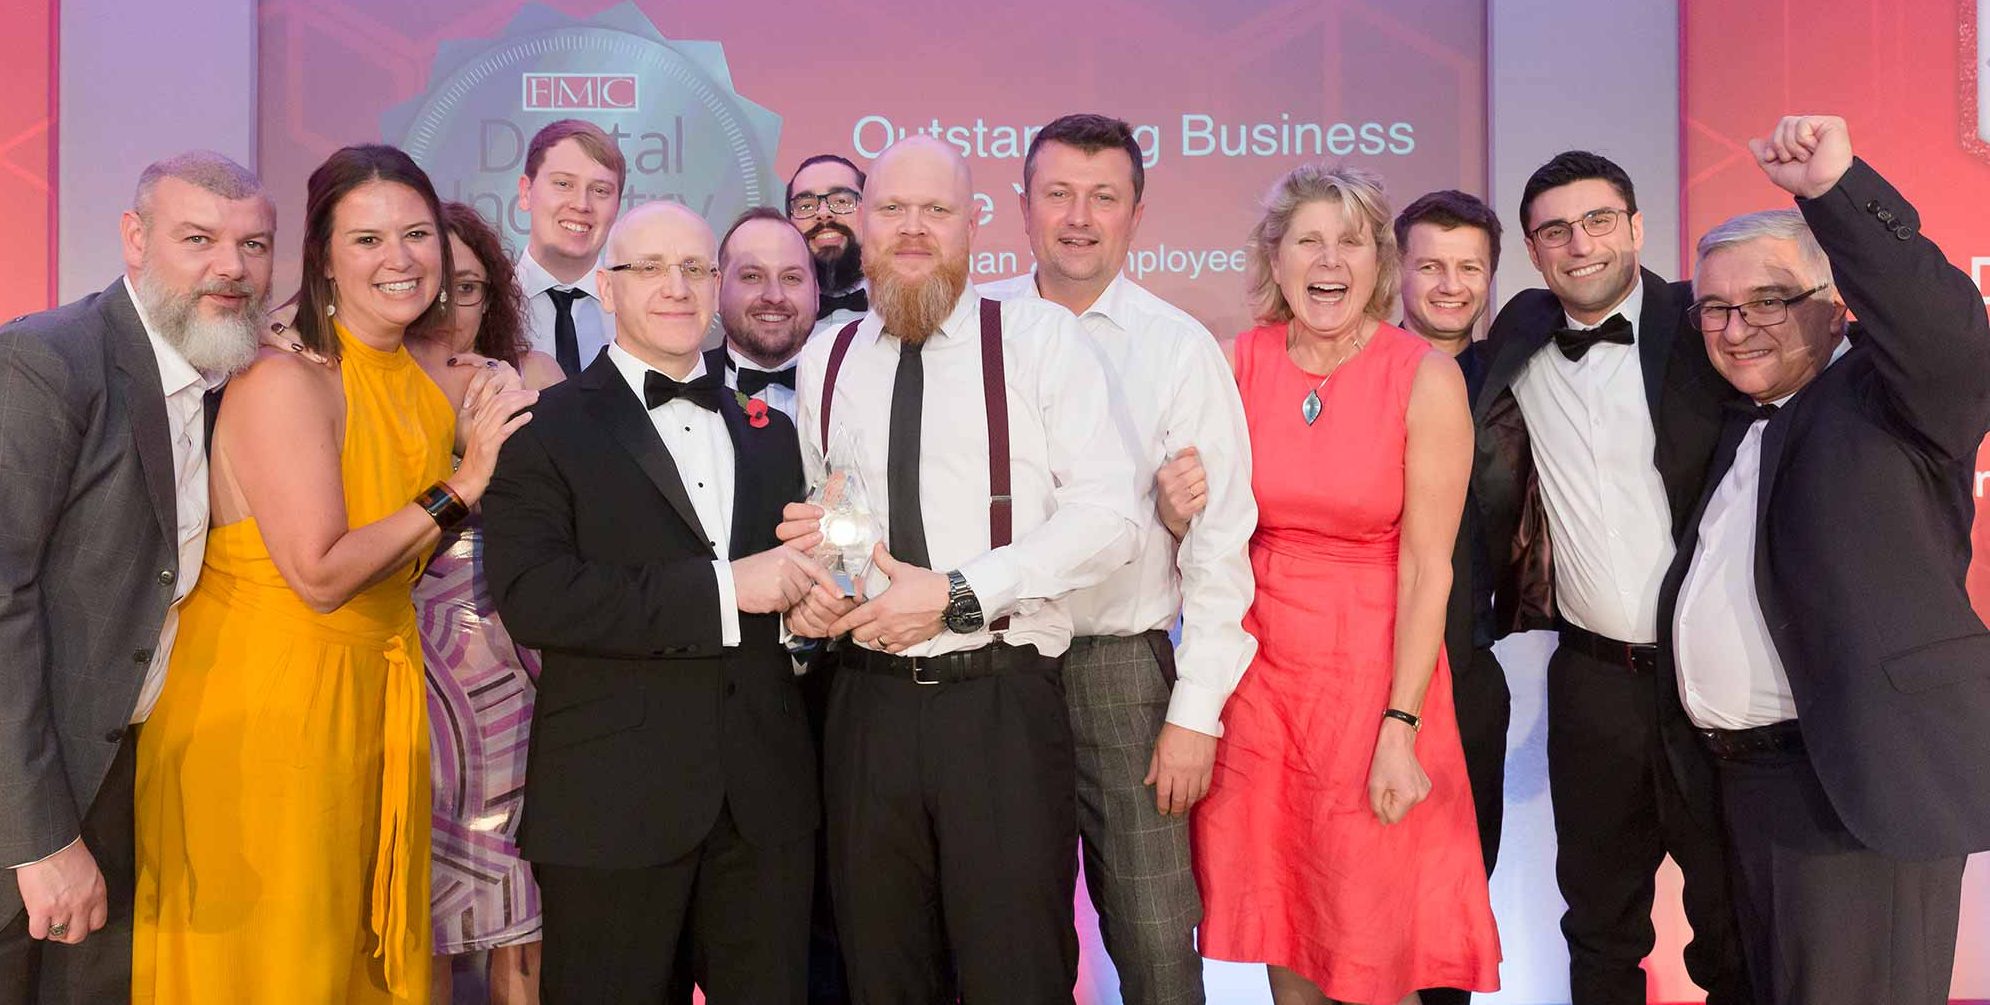 Dental Industry Awards 2019 Outstanding Business of the Year